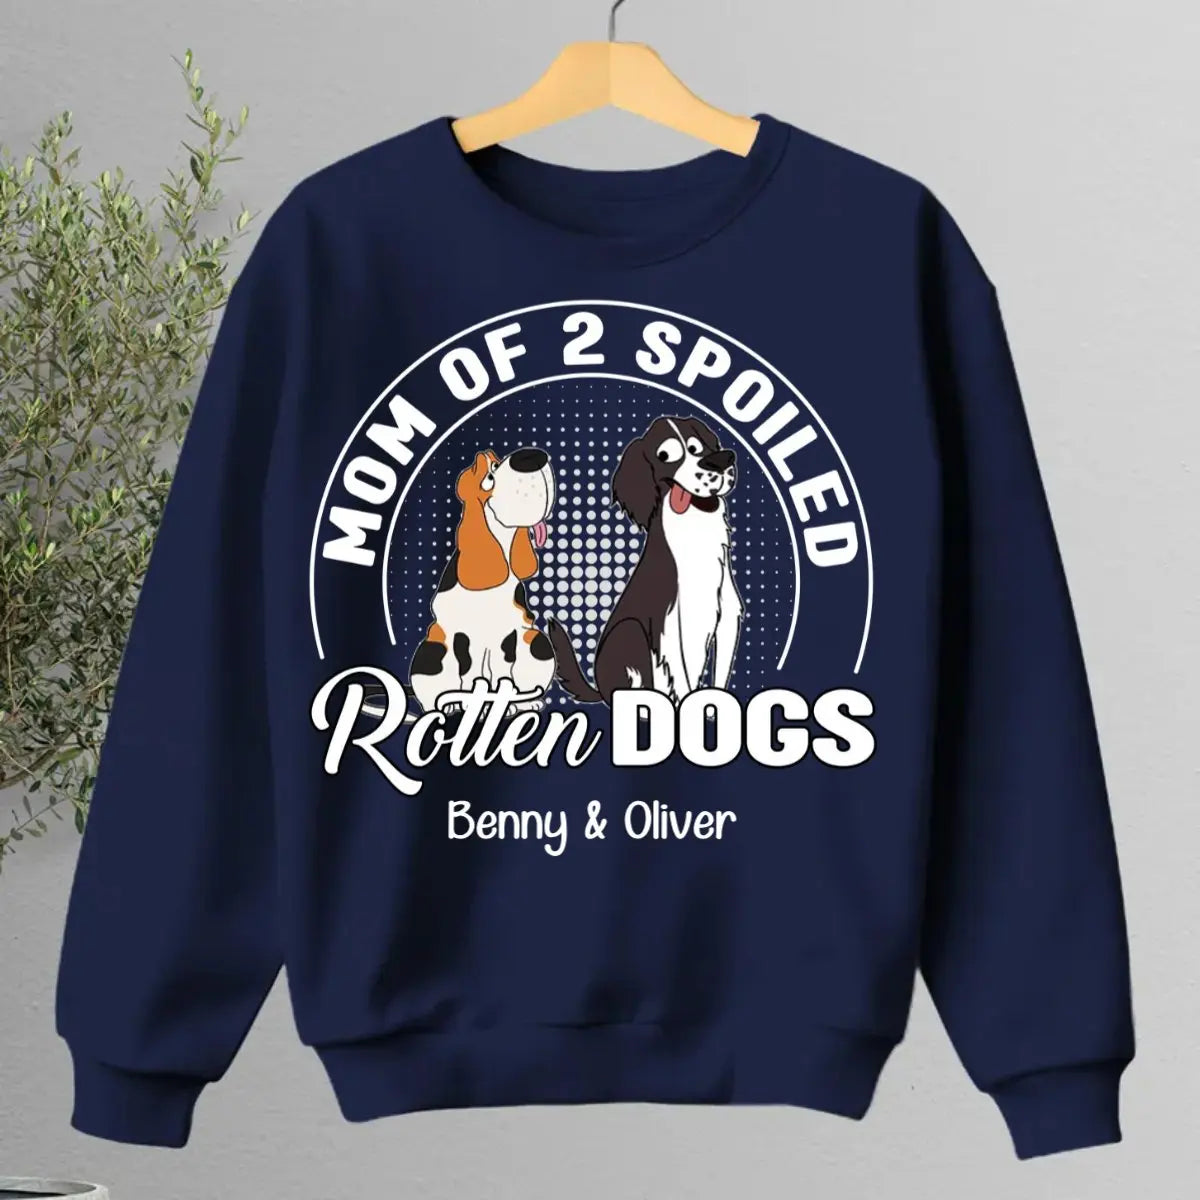 Dog Lovers - Mom Of A Spoiled Rotten Dog - Personalized Unisex T-shirt, Hoodie, Sweatshirt